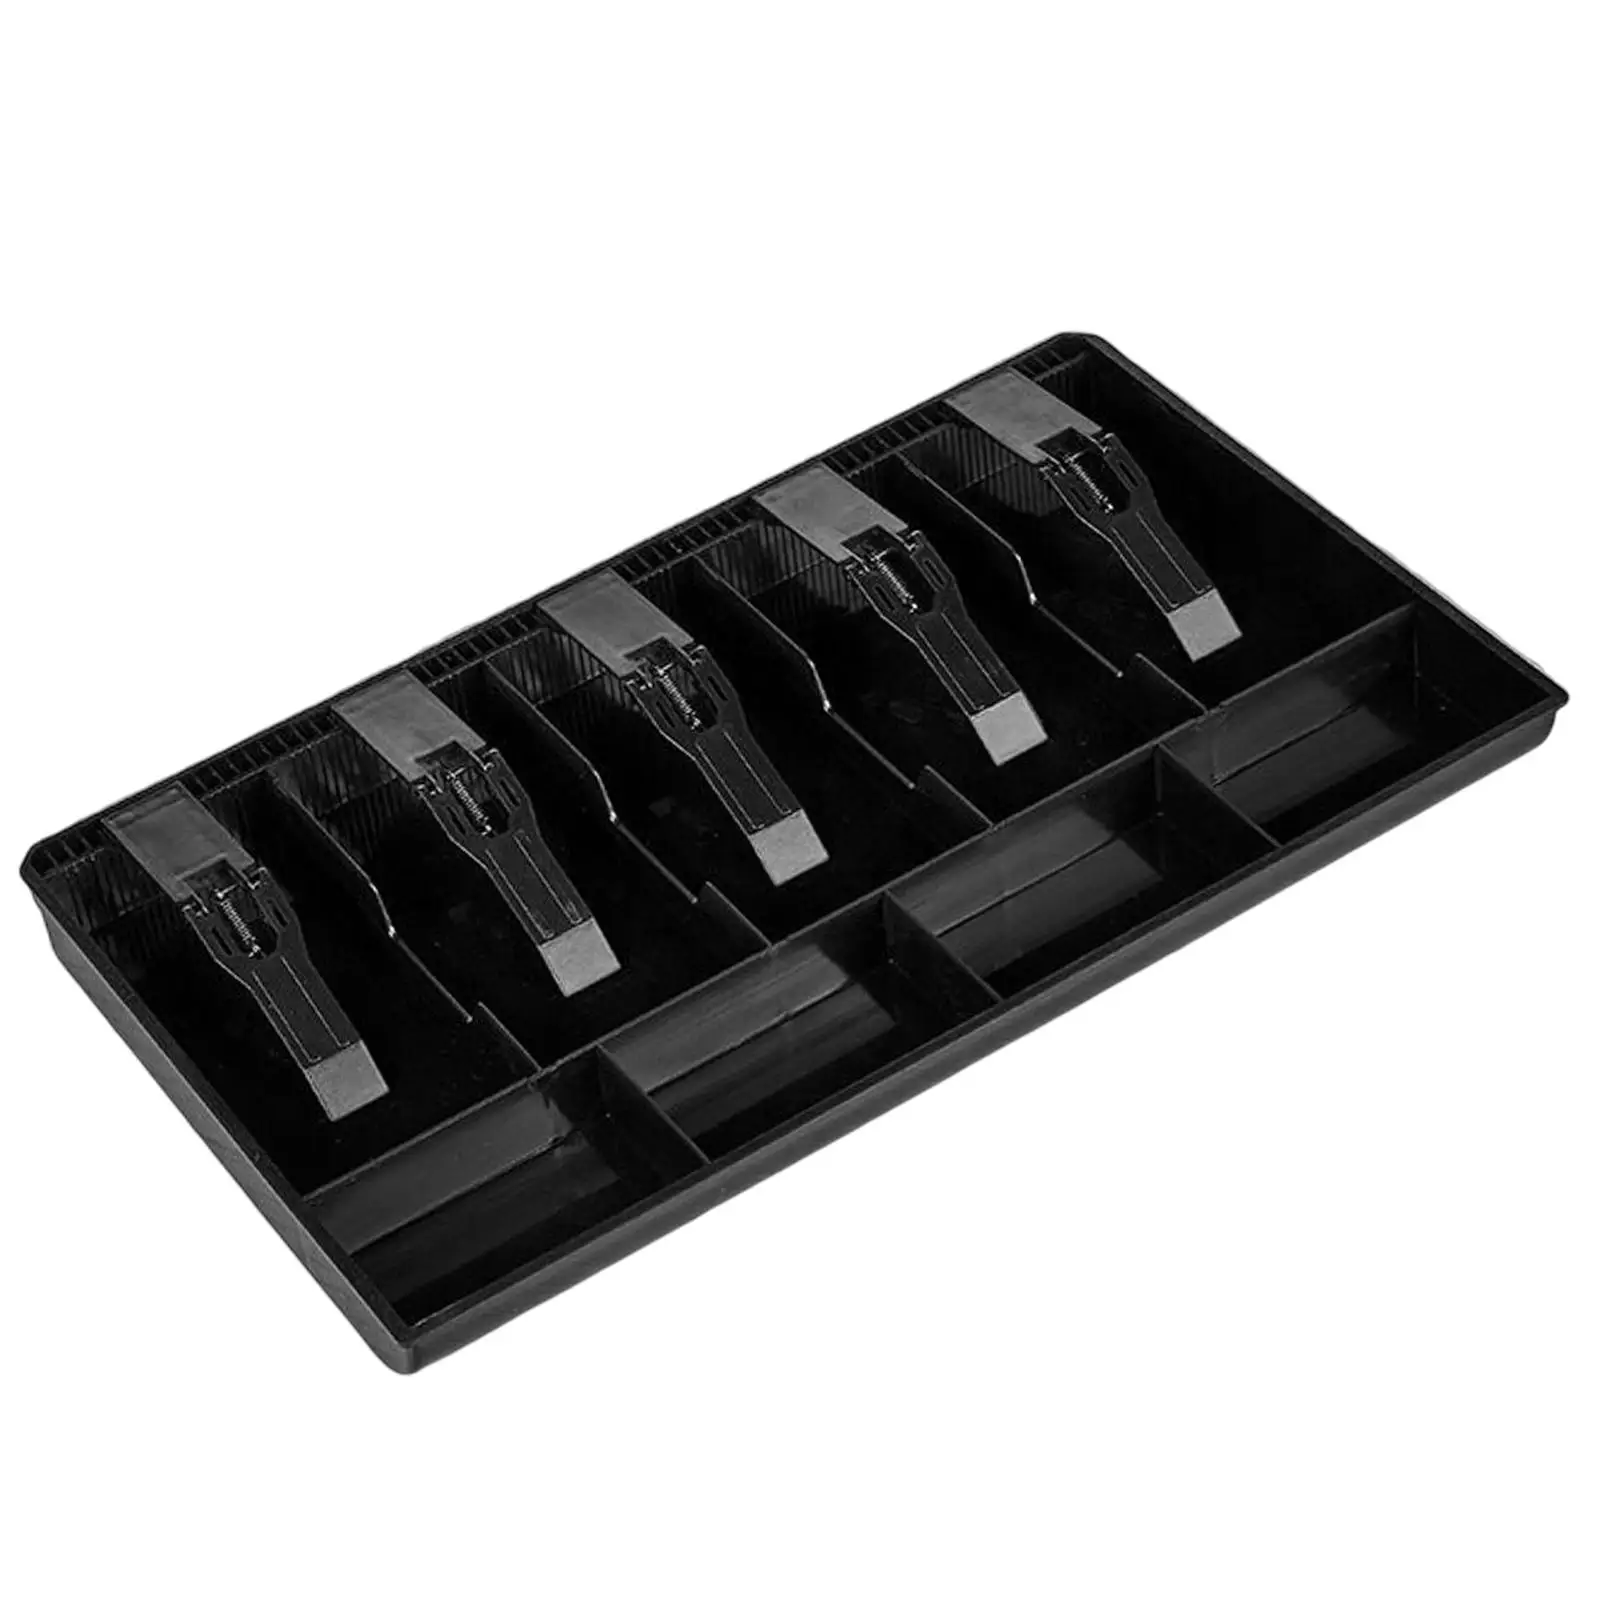 1x Cash Register Drawer Insert Tray Replacement with Clip Cash Register Drawer for Money Storage Home Supermarket Small Business